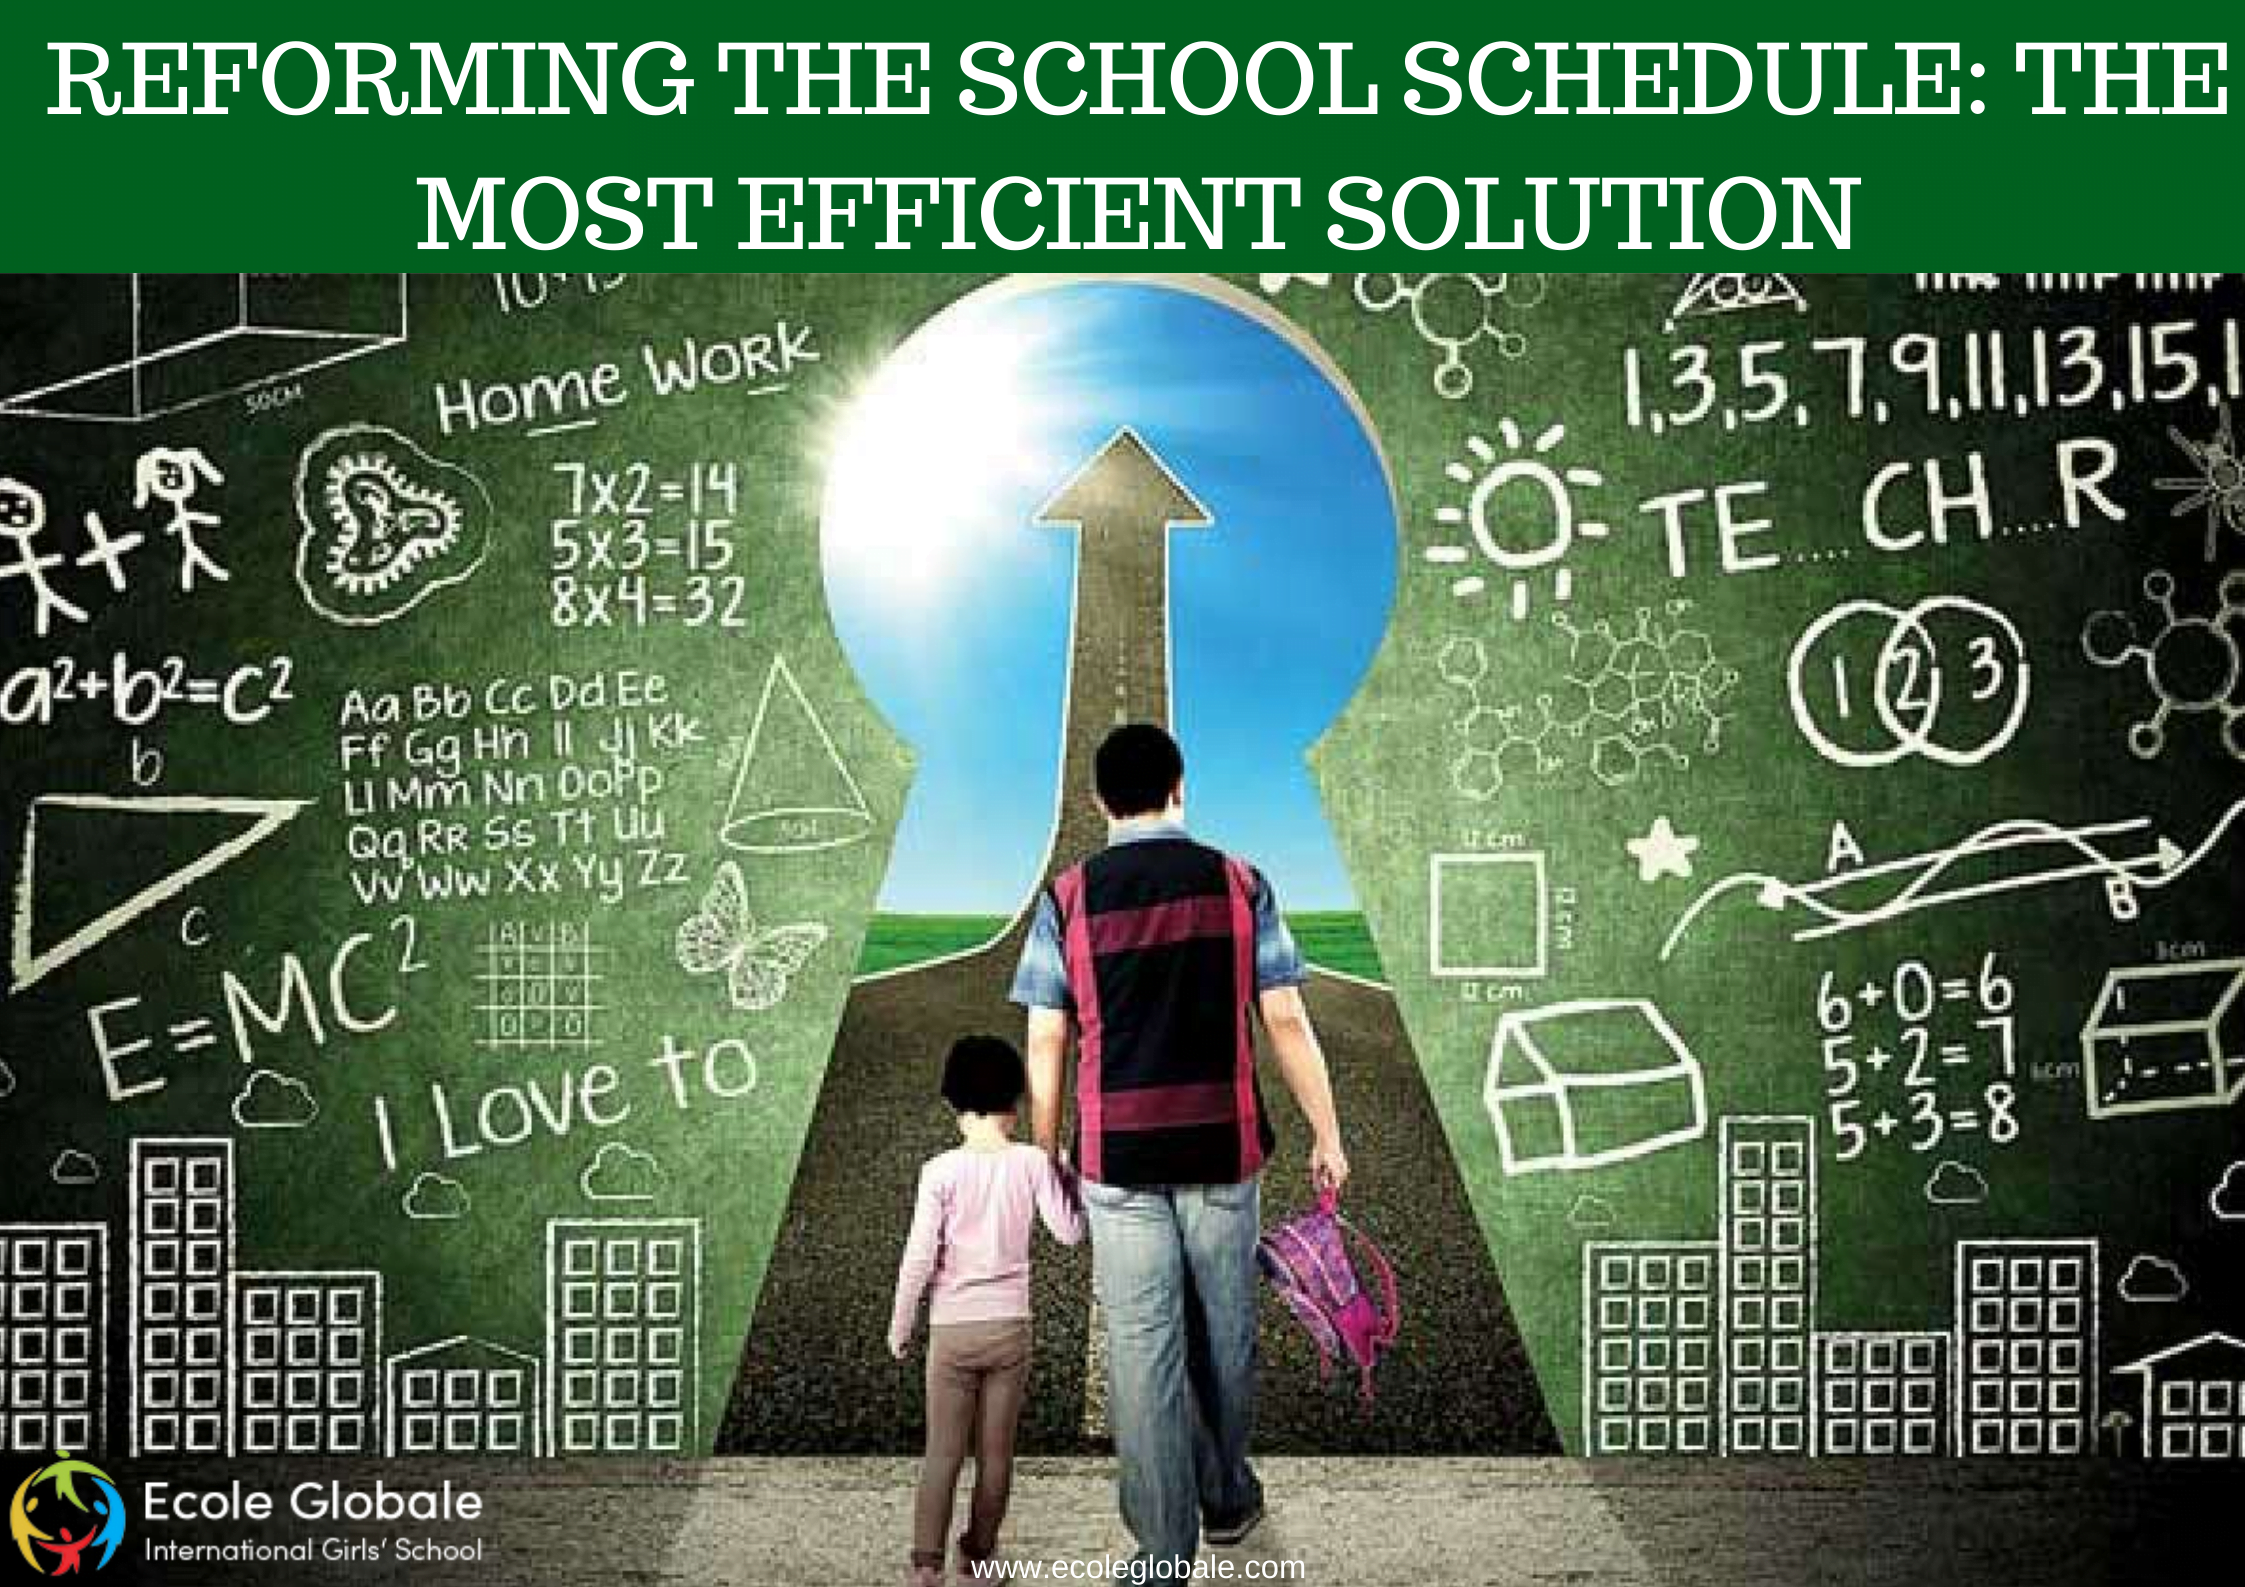 REFORMING THE SCHOOL SCHEDULE: THE MOST EFFICIENT SOLUTION